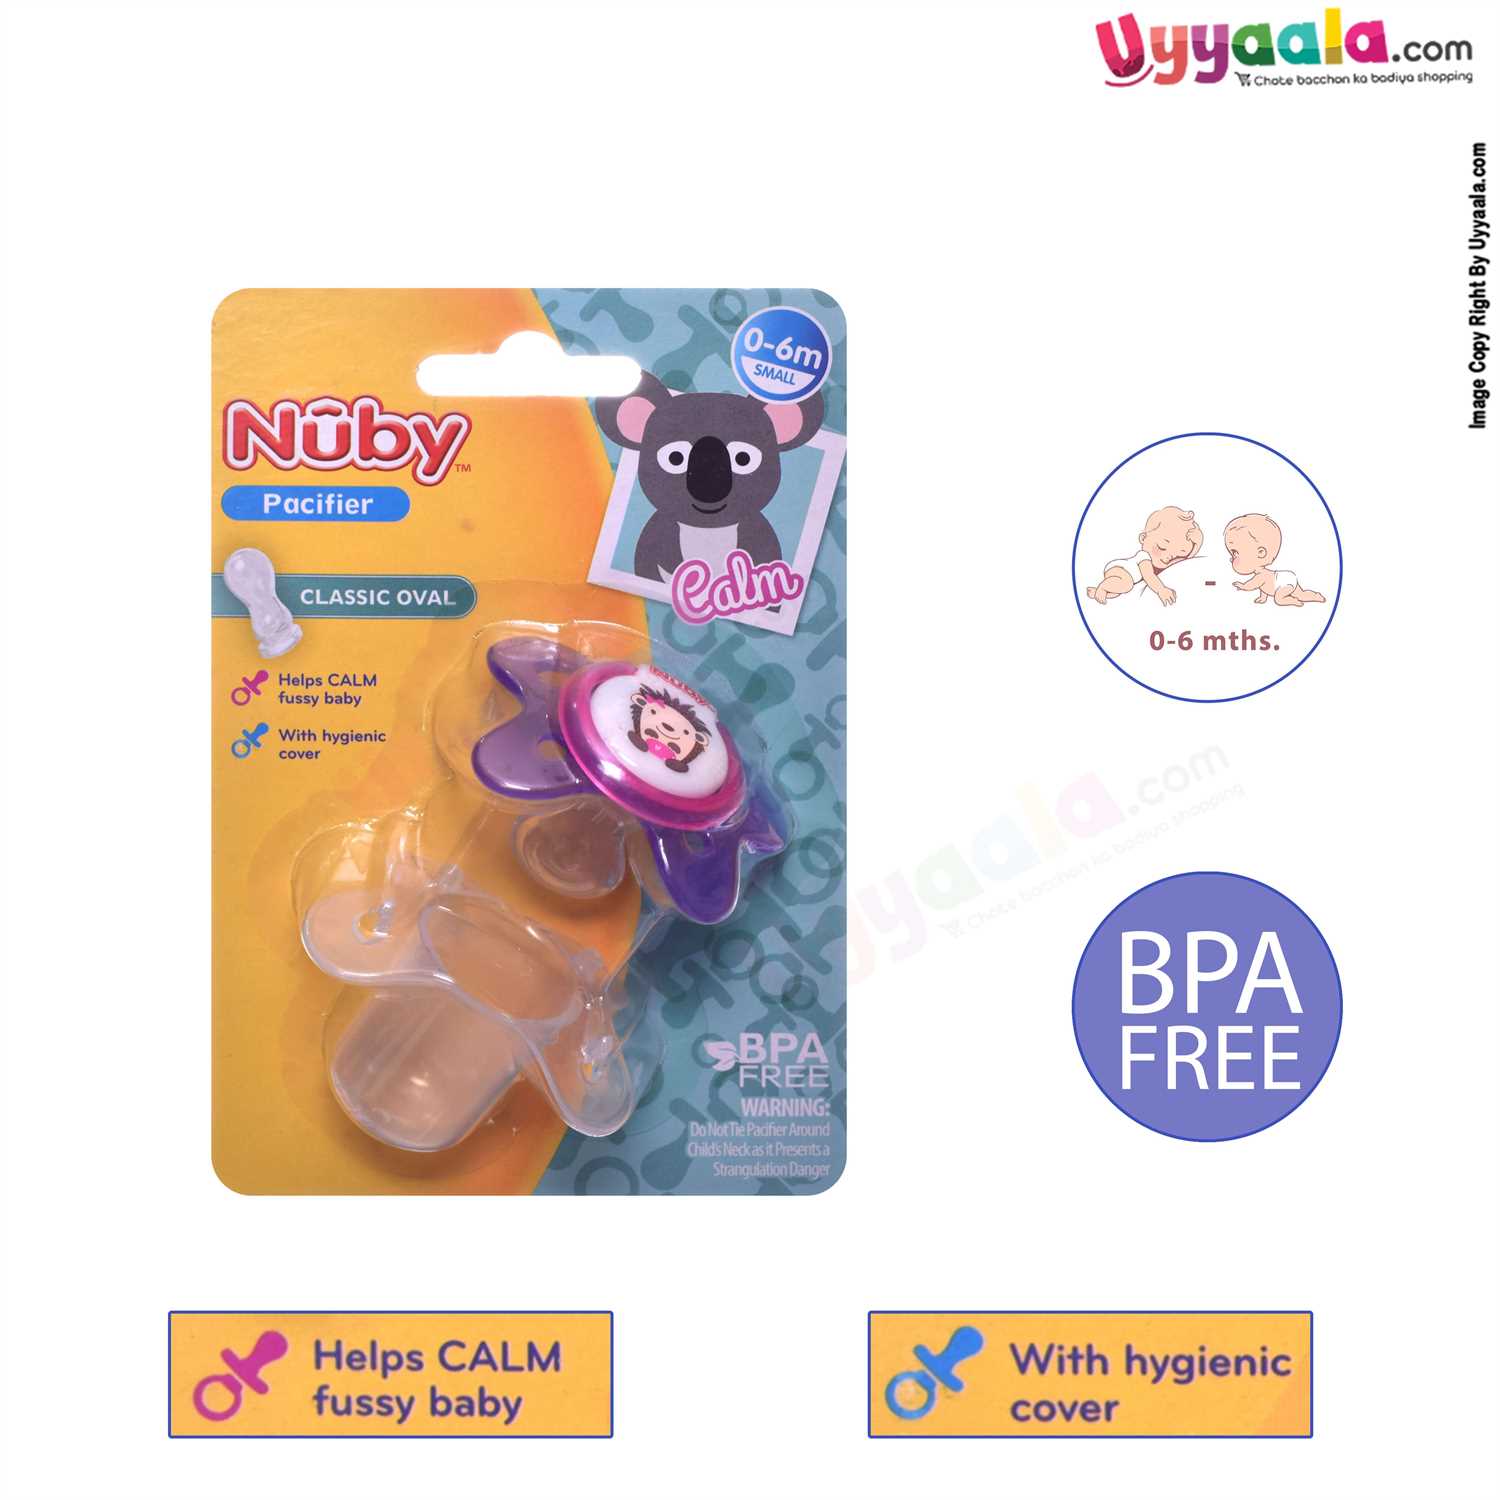 NUBY Classic oval soft pacifier with case - Violet, 0-6m